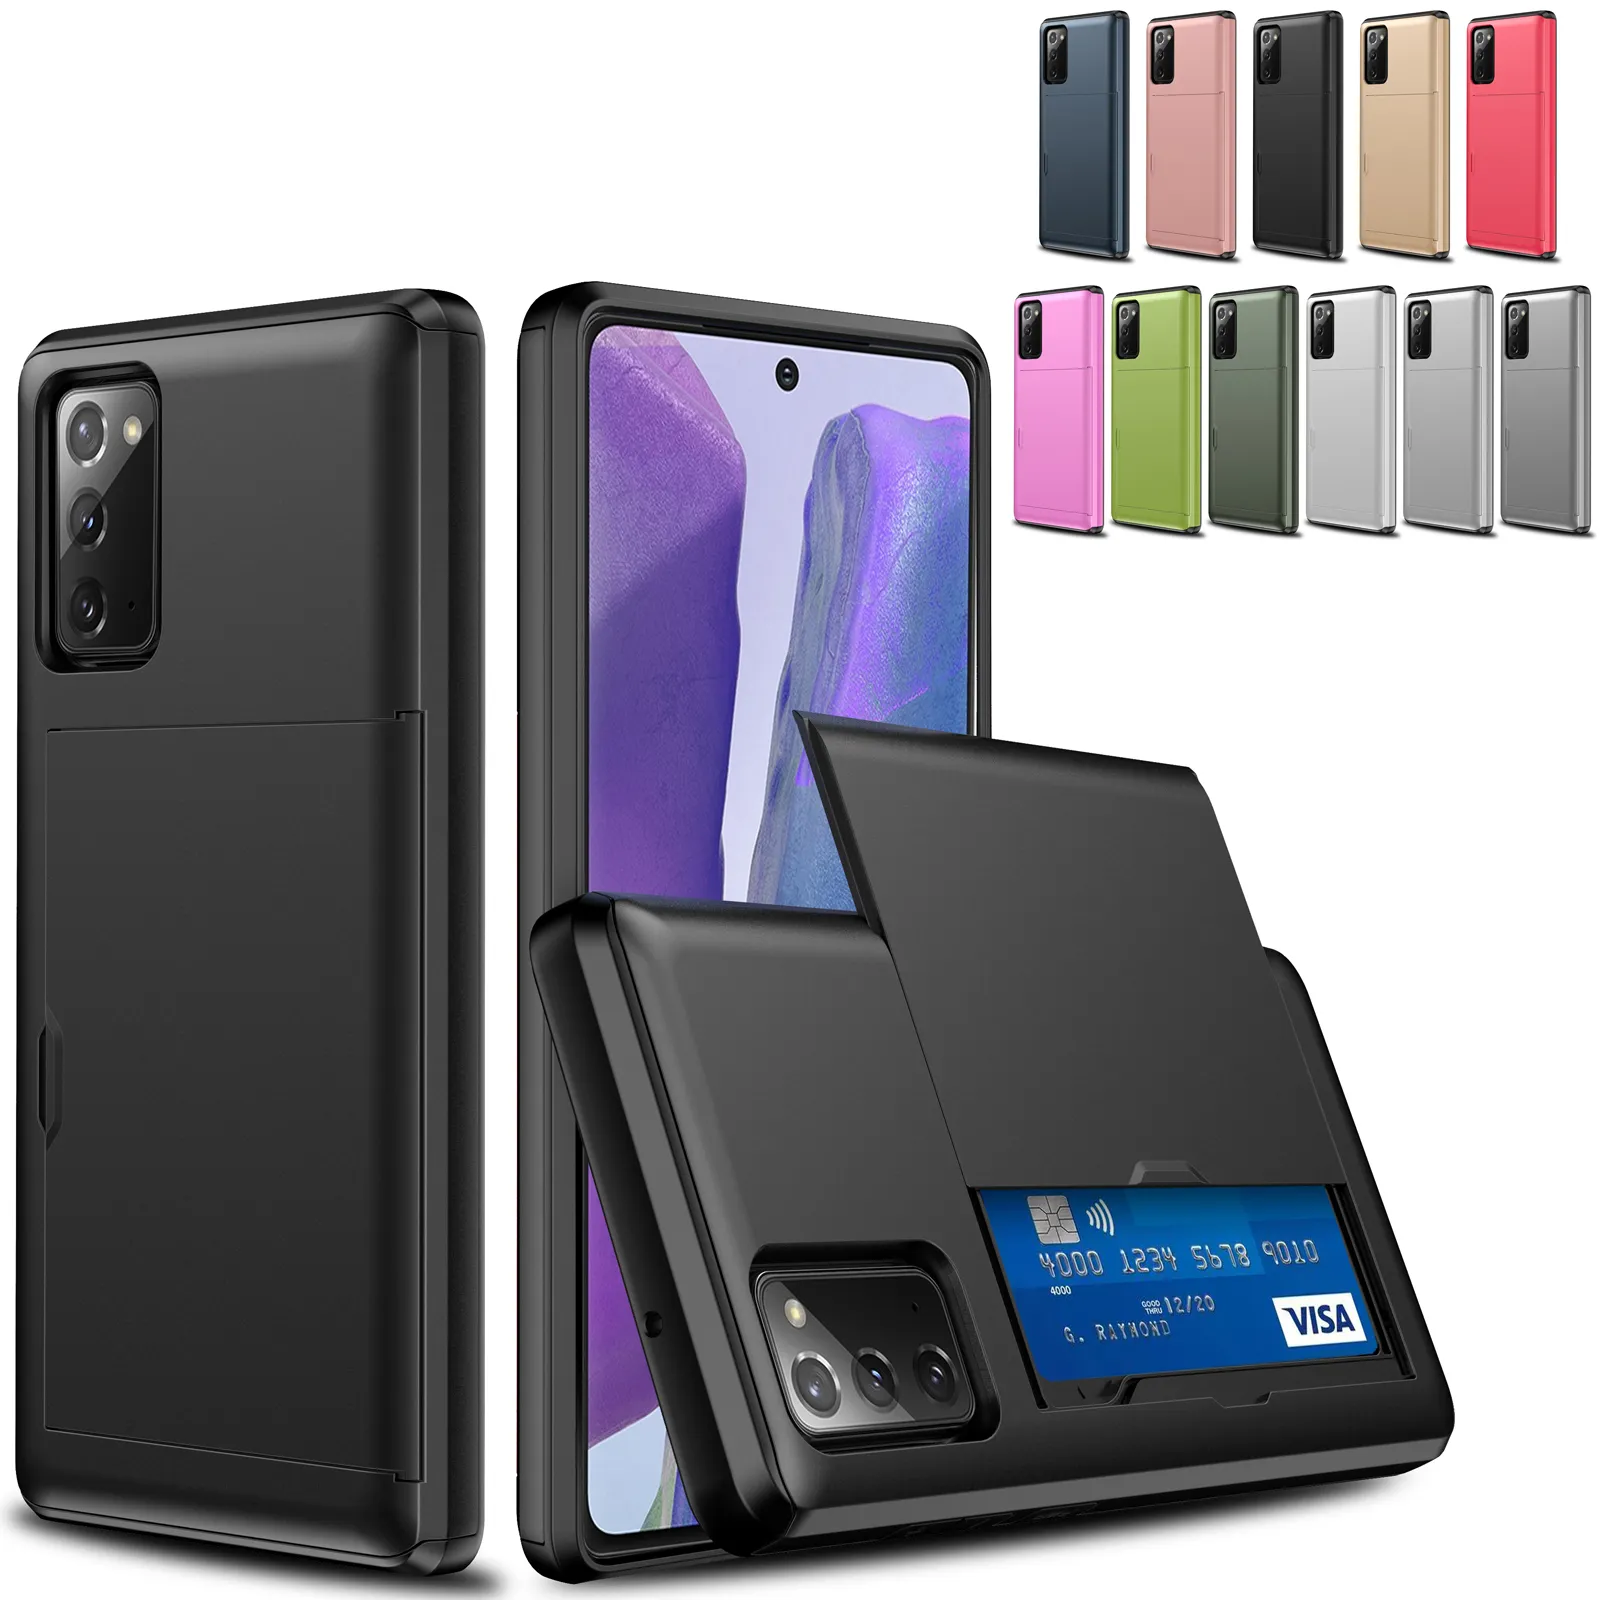 SGP Hybrid Dual Layer Slide Card Slot Case For Samsung Galaxy S20 FE Note 20 Ultra S20 Ultra Note 10 Plus S10 Plus